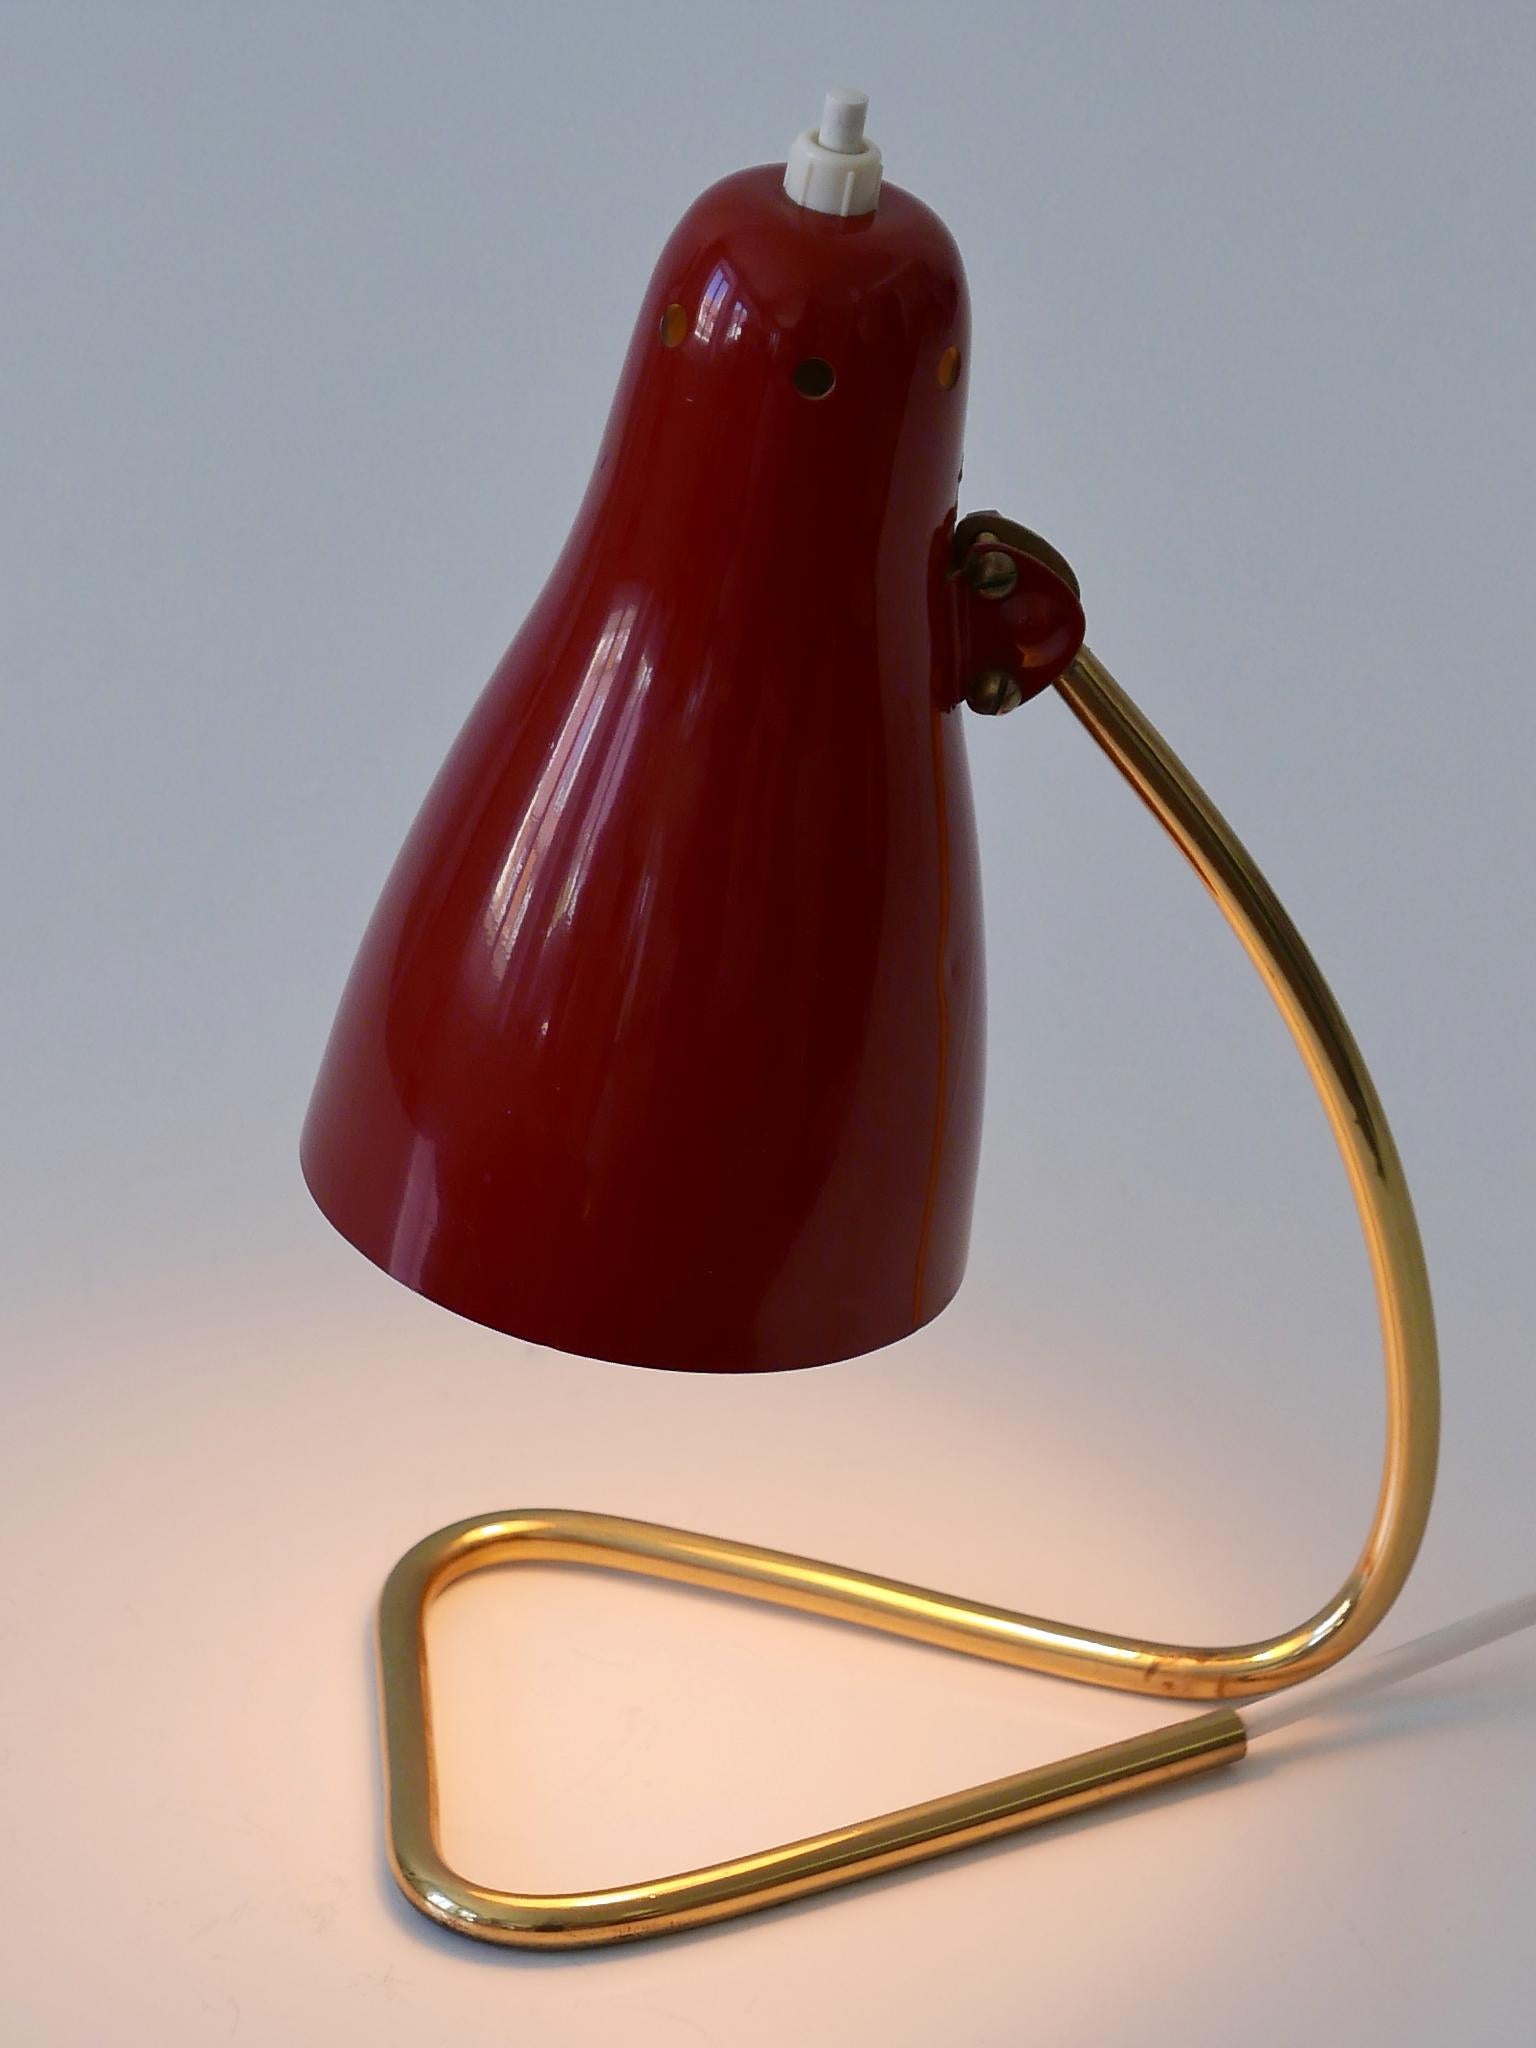 Lovely Mid-Century Modern Table Lamp or Sconce by Rupert Nikoll, Austria, 1960s For Sale 9